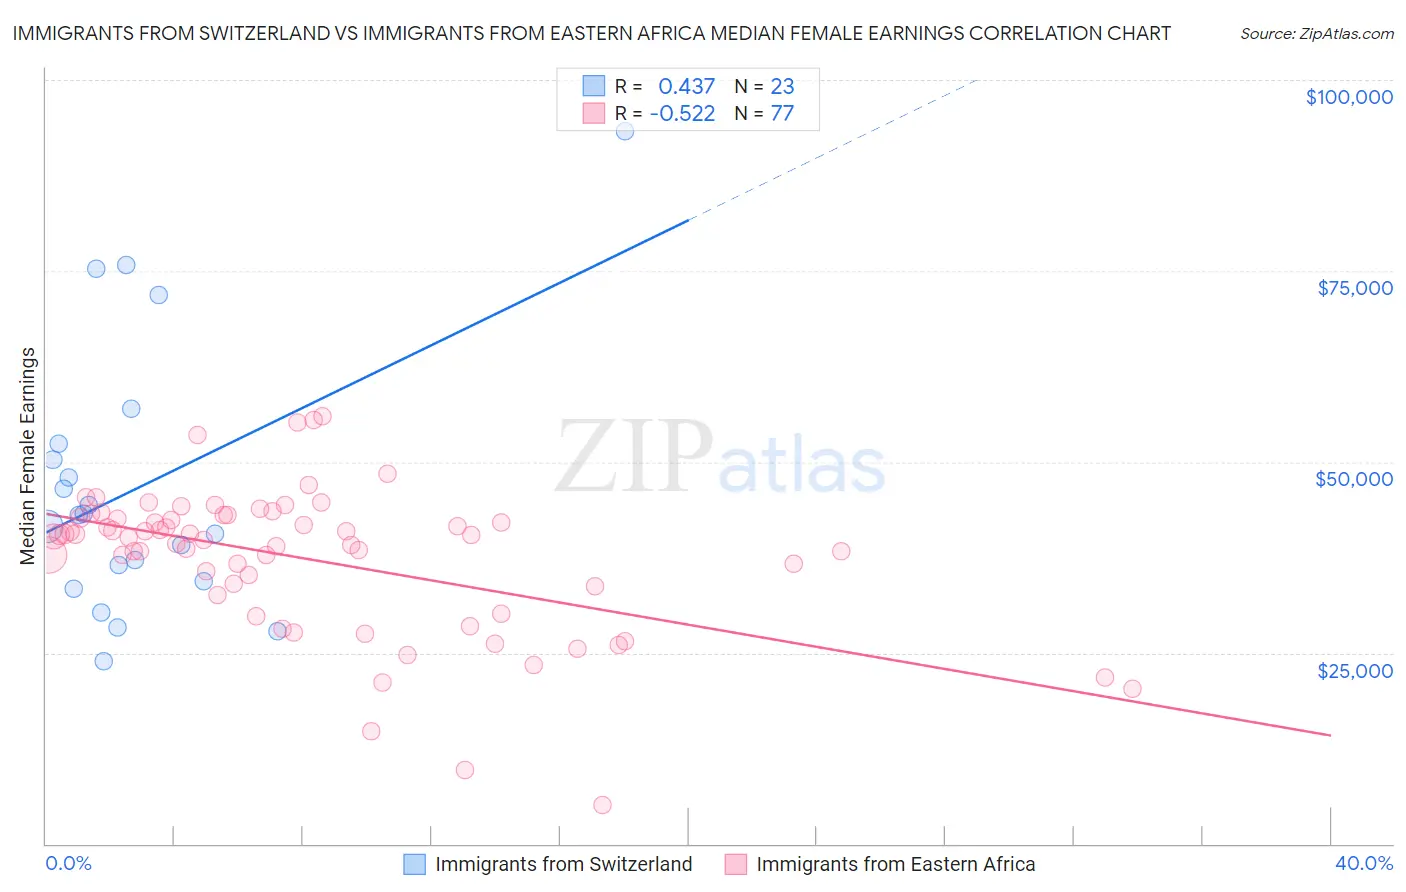 Immigrants from Switzerland vs Immigrants from Eastern Africa Median Female Earnings